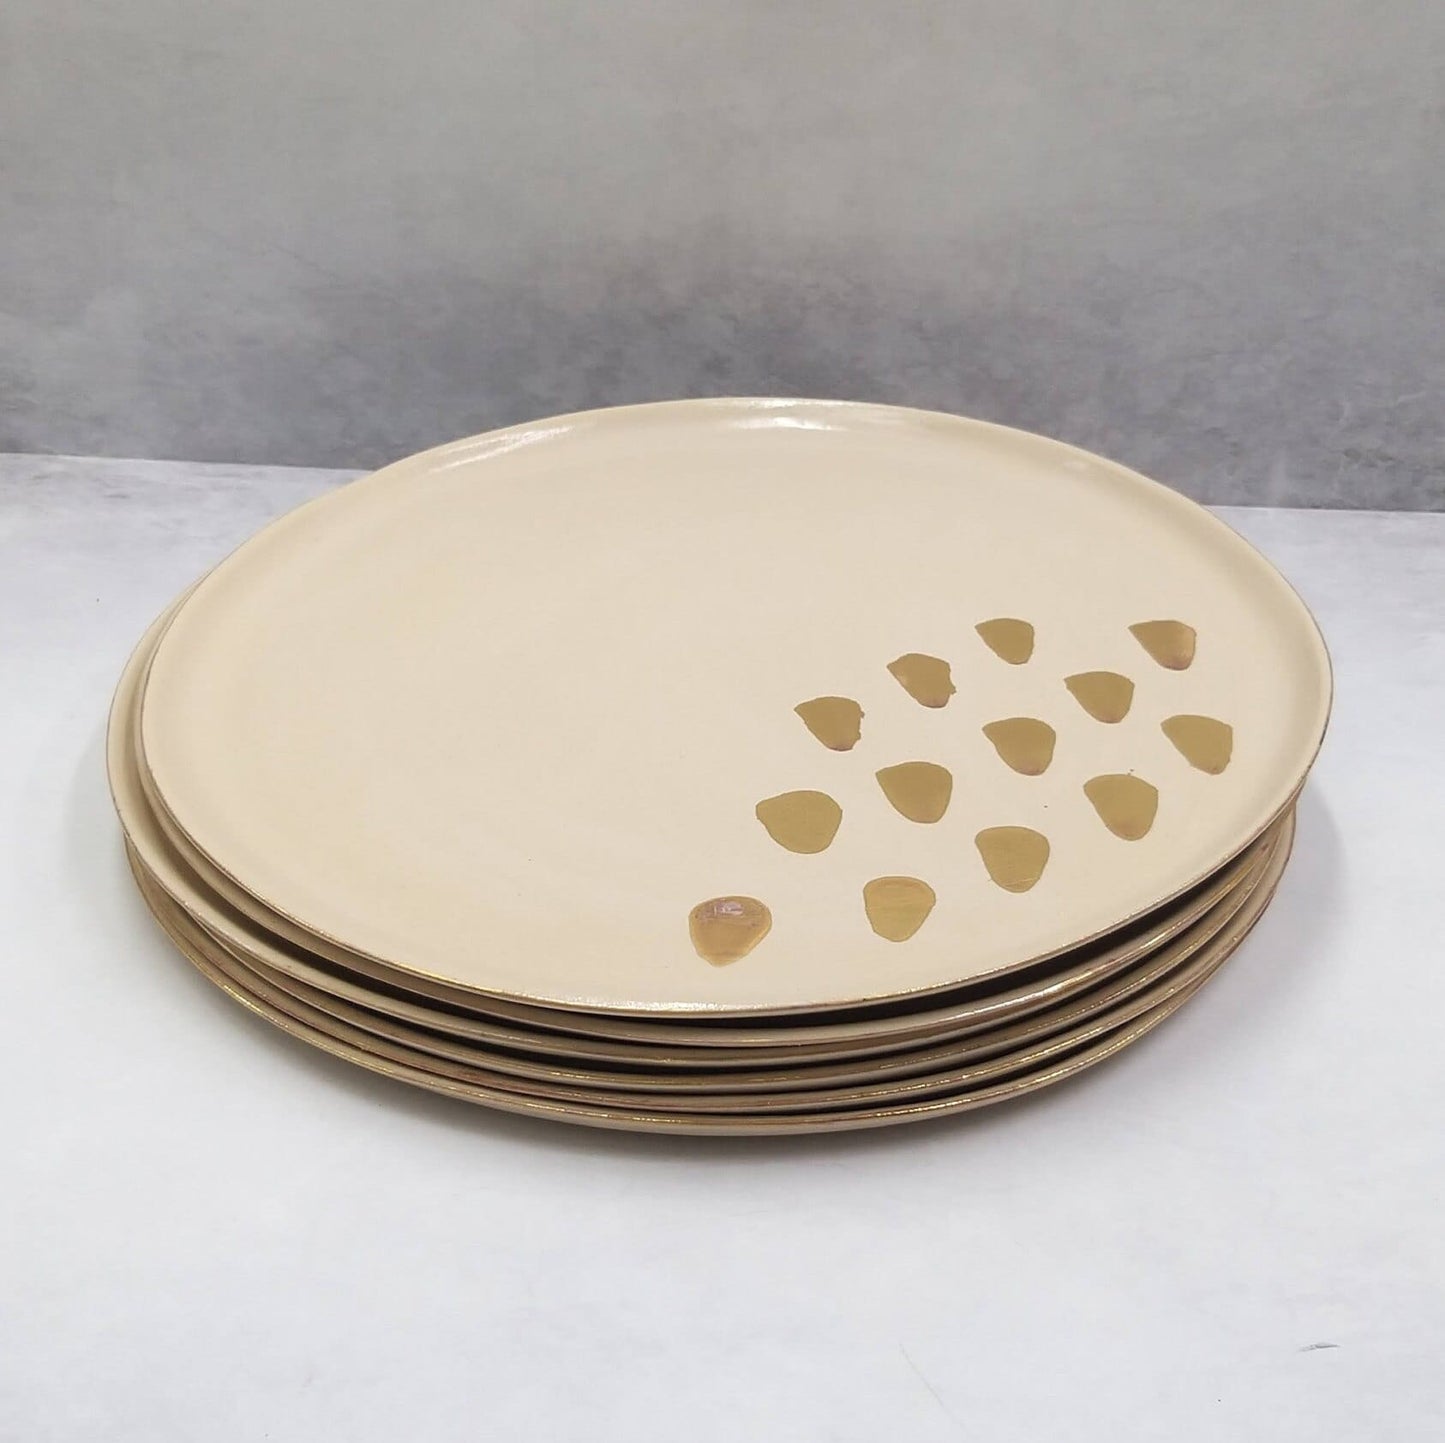 Fine china with gold dots